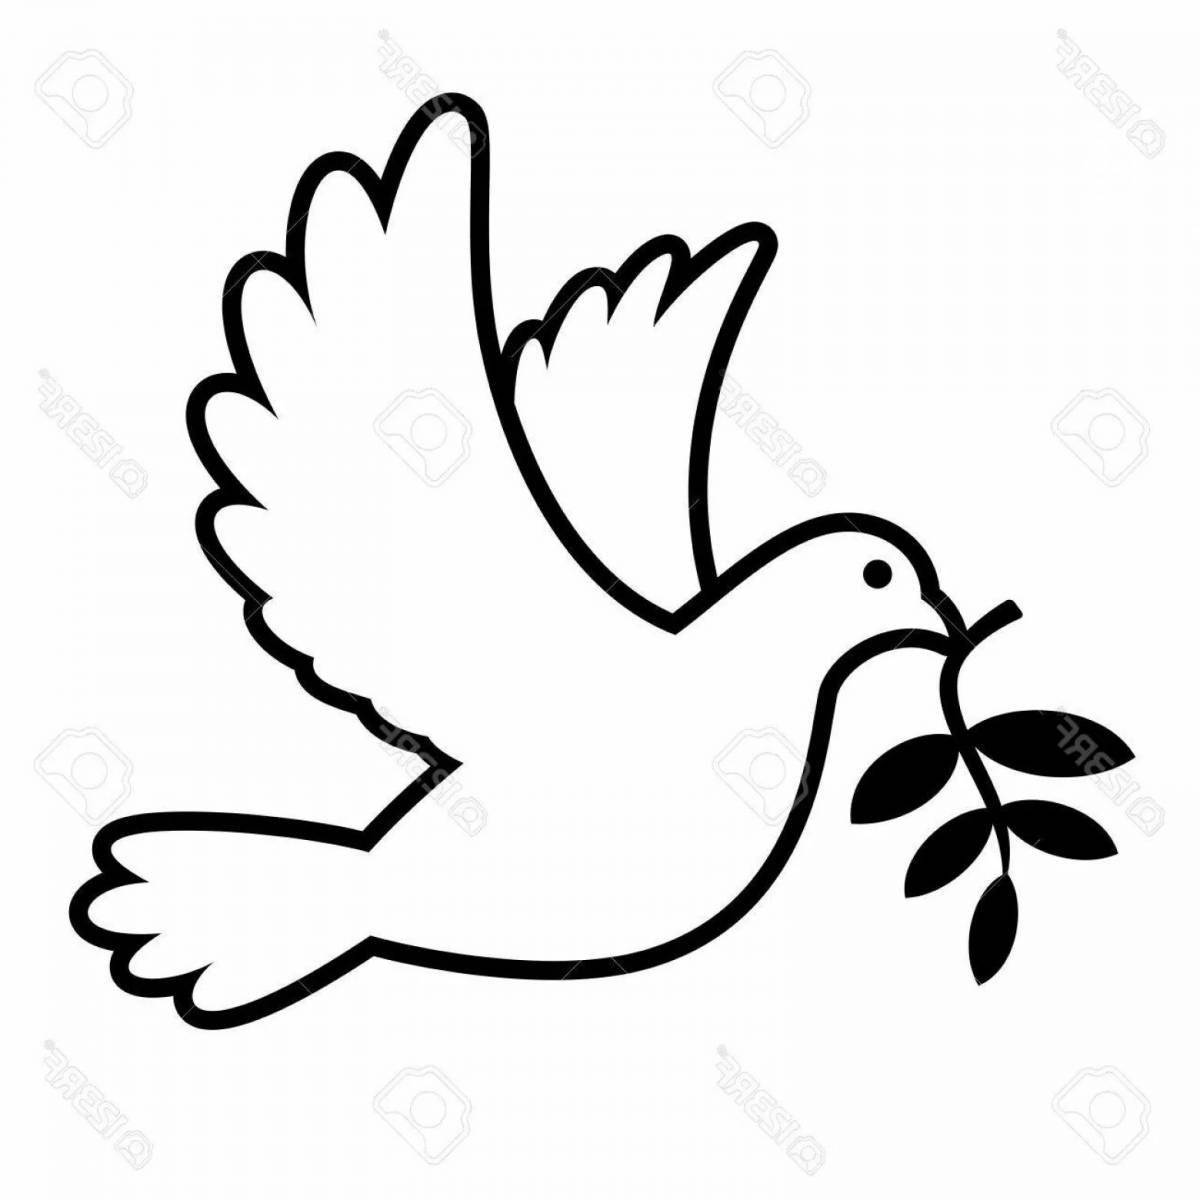 Coloring page gentle white dove